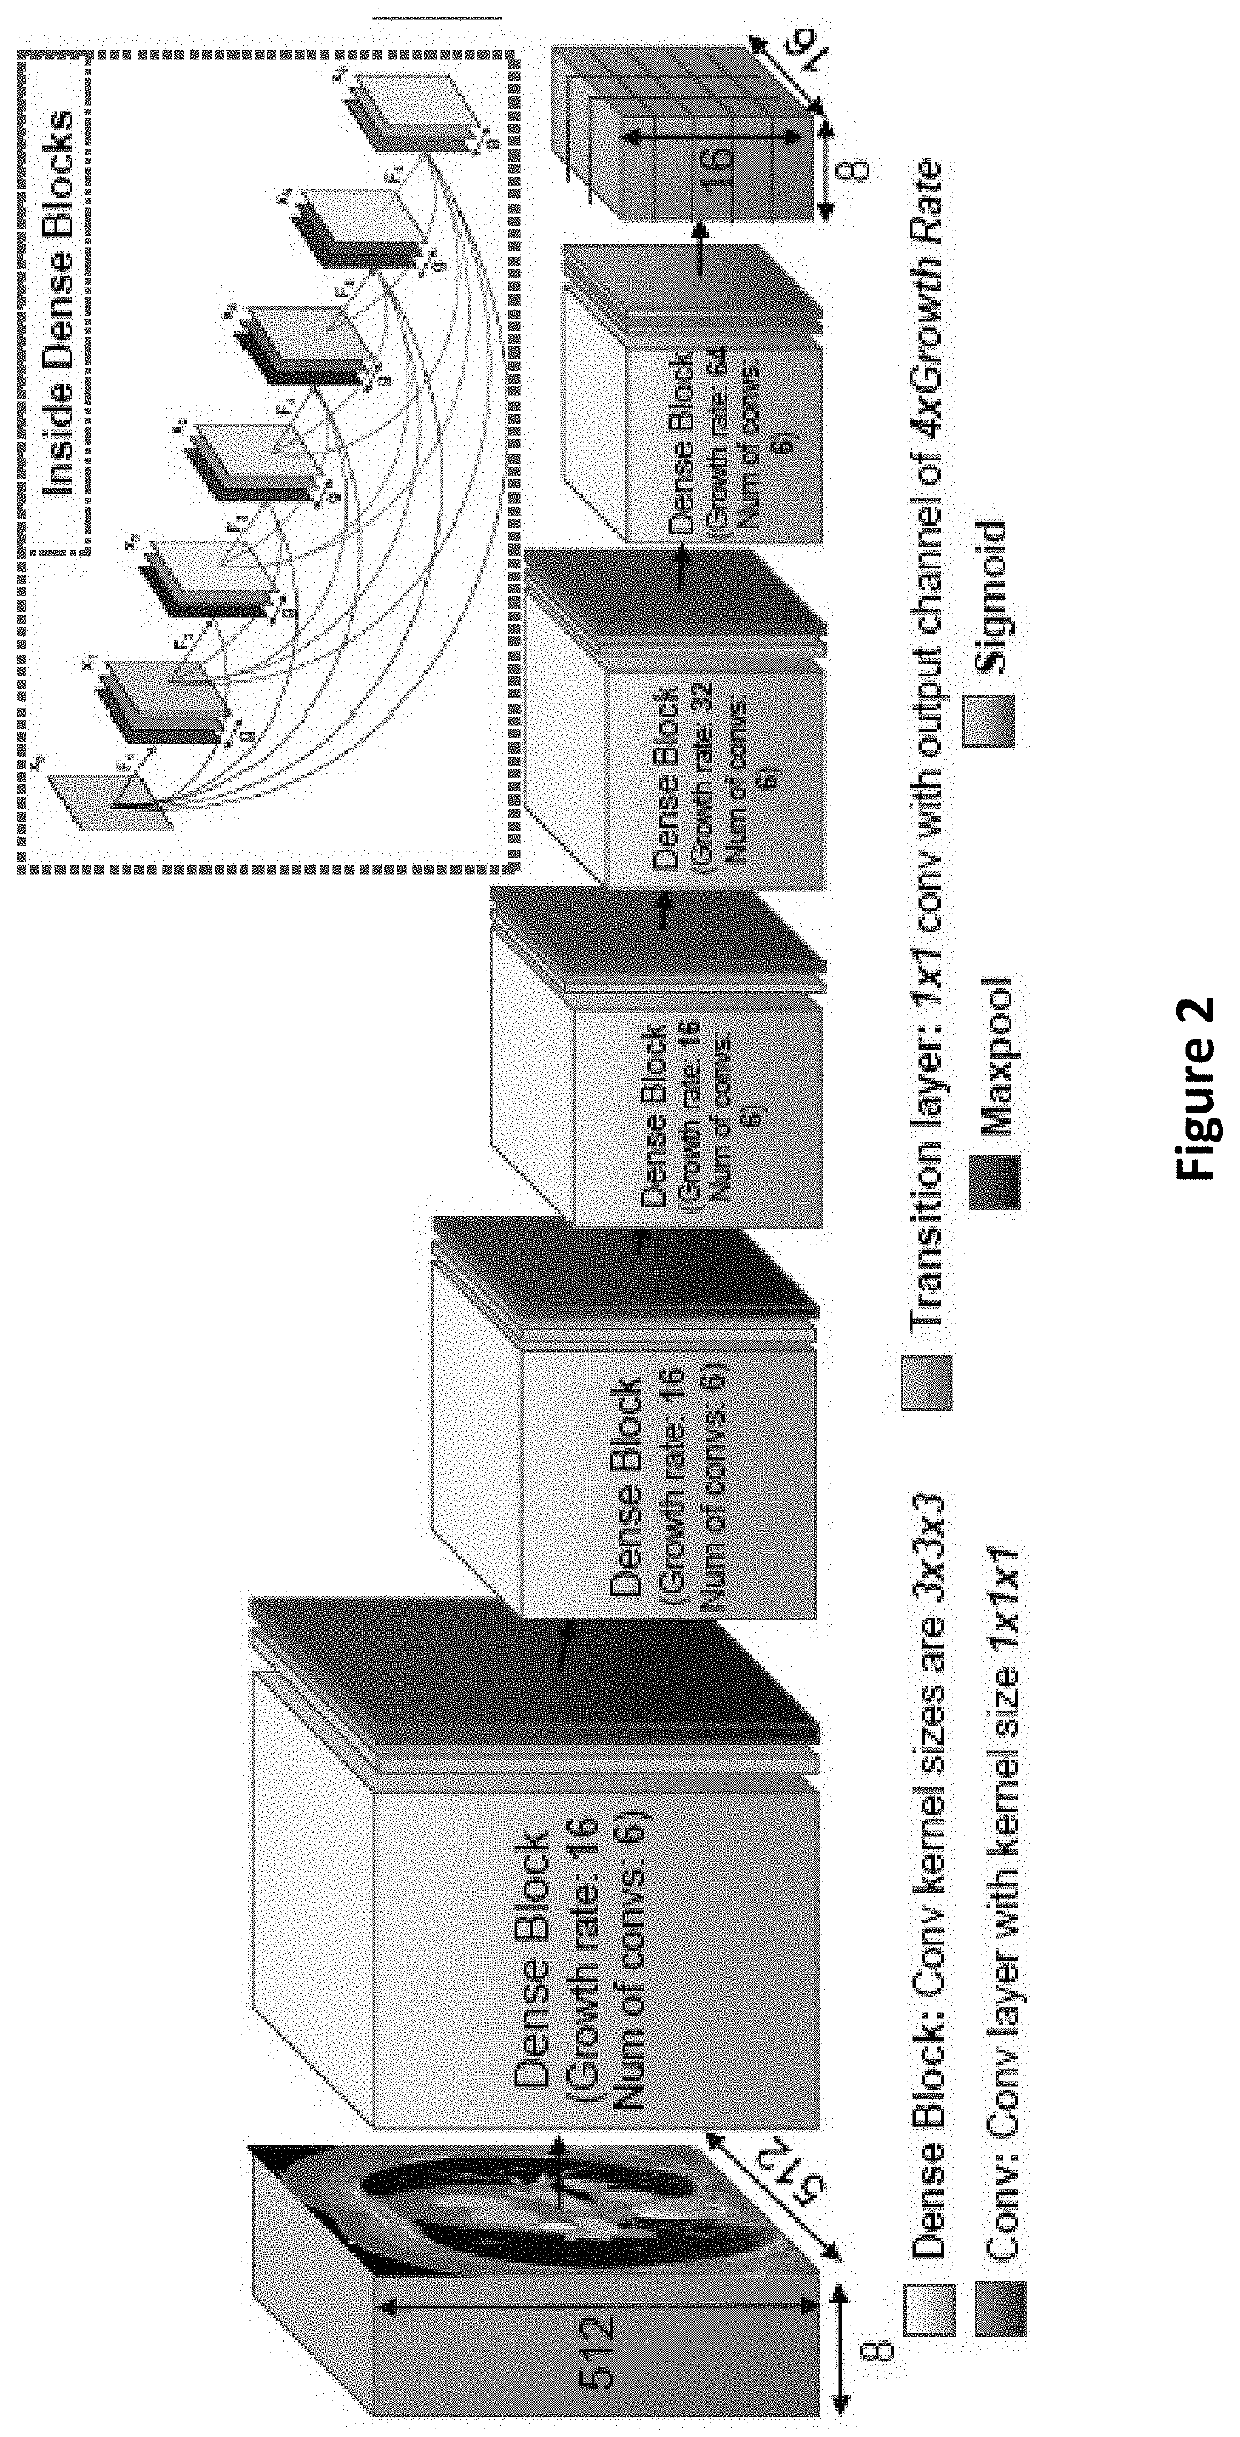 Method for detection and diagnosis of lung and pancreatic cancers from imaging scans